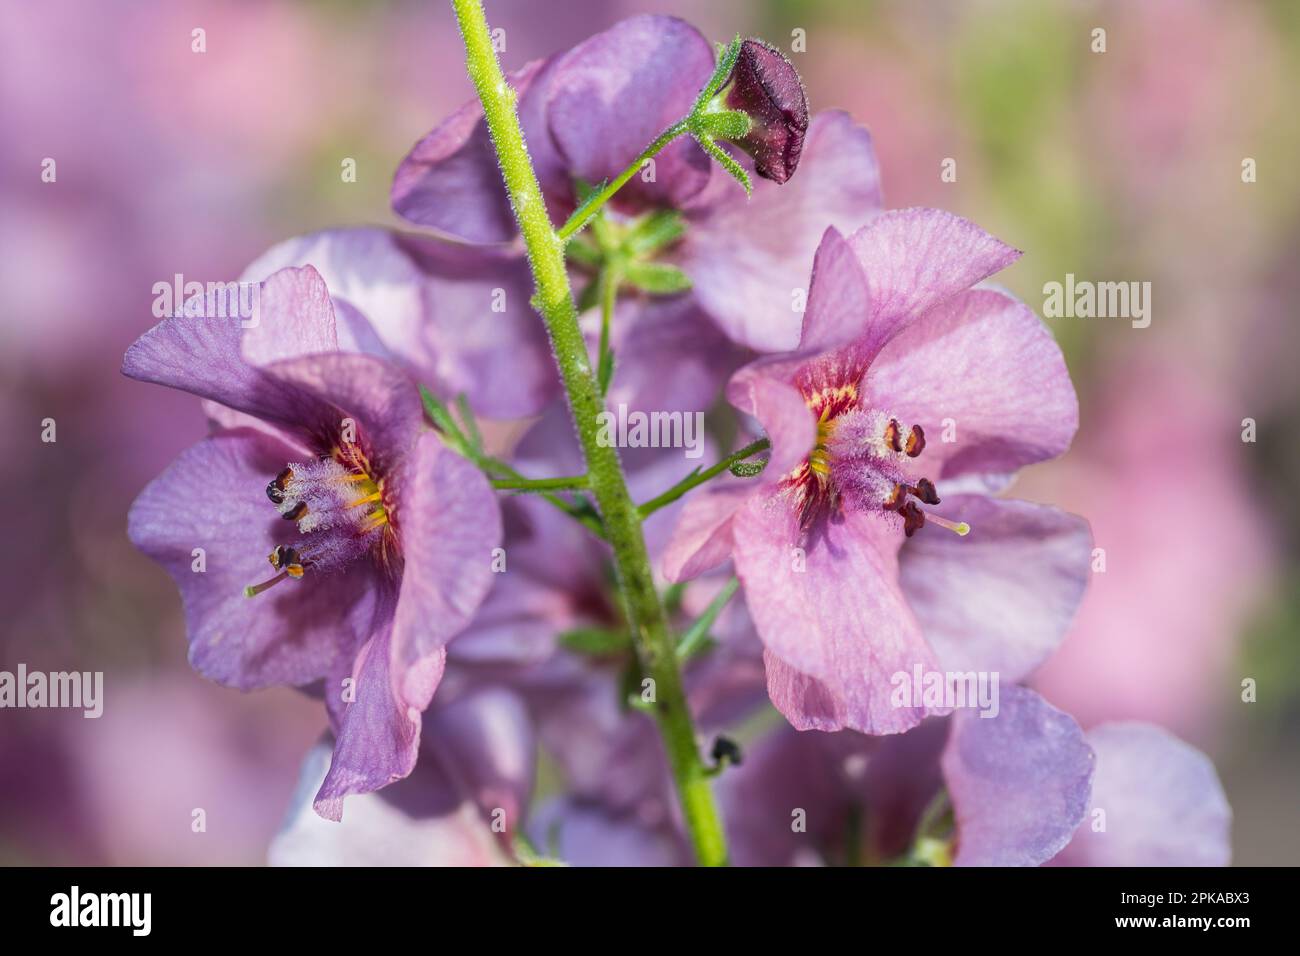 Close-up detail of the Verbascum phoeniceum plant in a Texas garden. Stock Photo